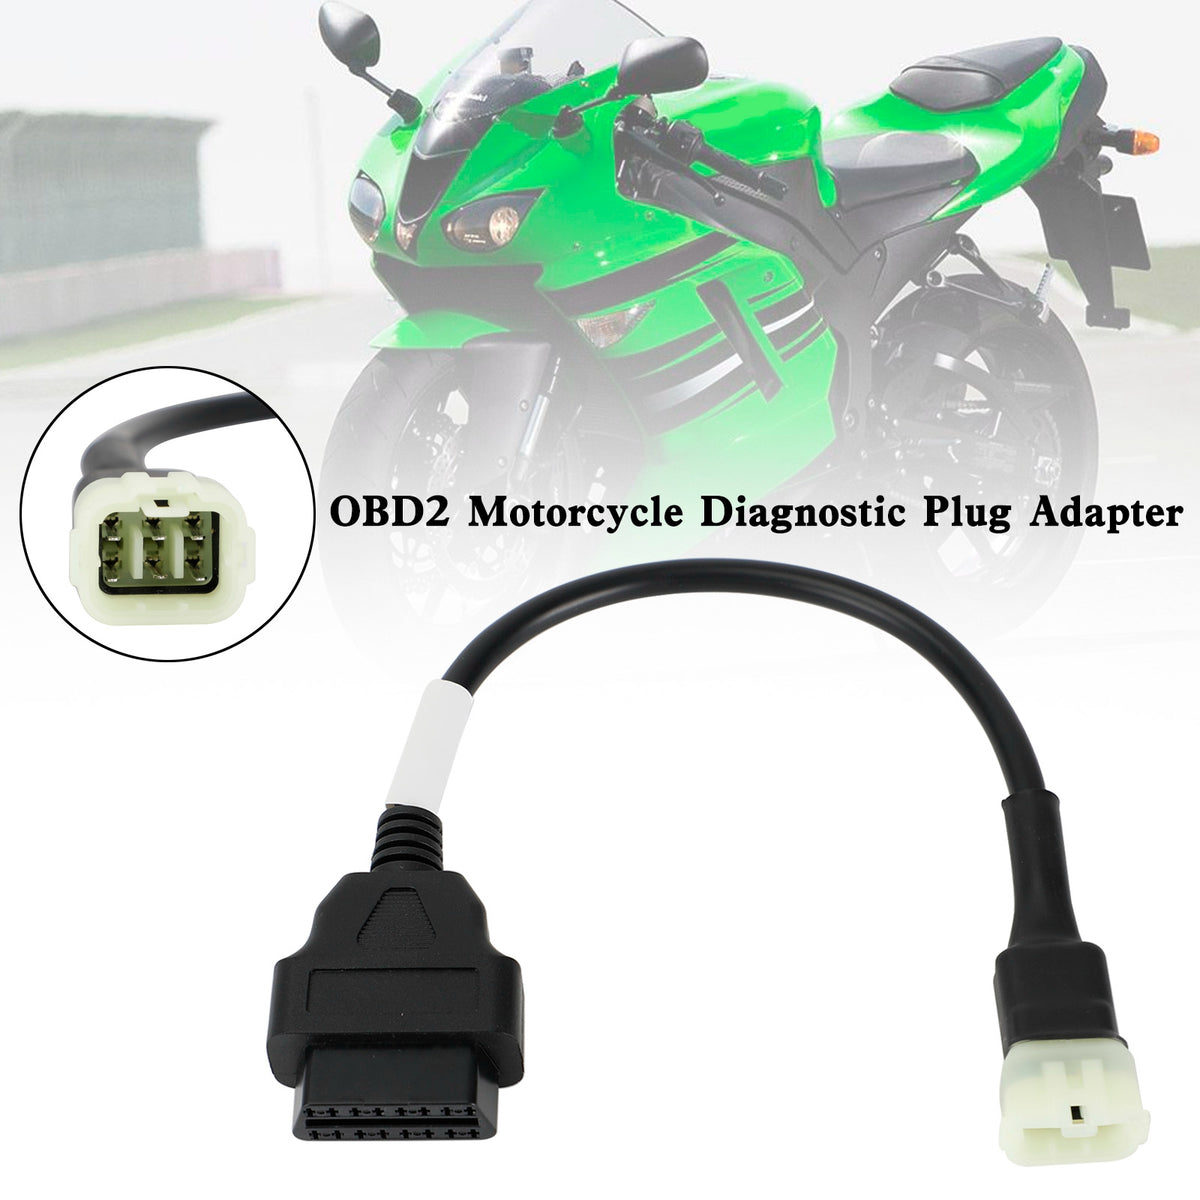 OBD2 6 Pin Diagnostic Plug Adapter For Kawasaki Motorcycle Scooter ATV Cable Generic